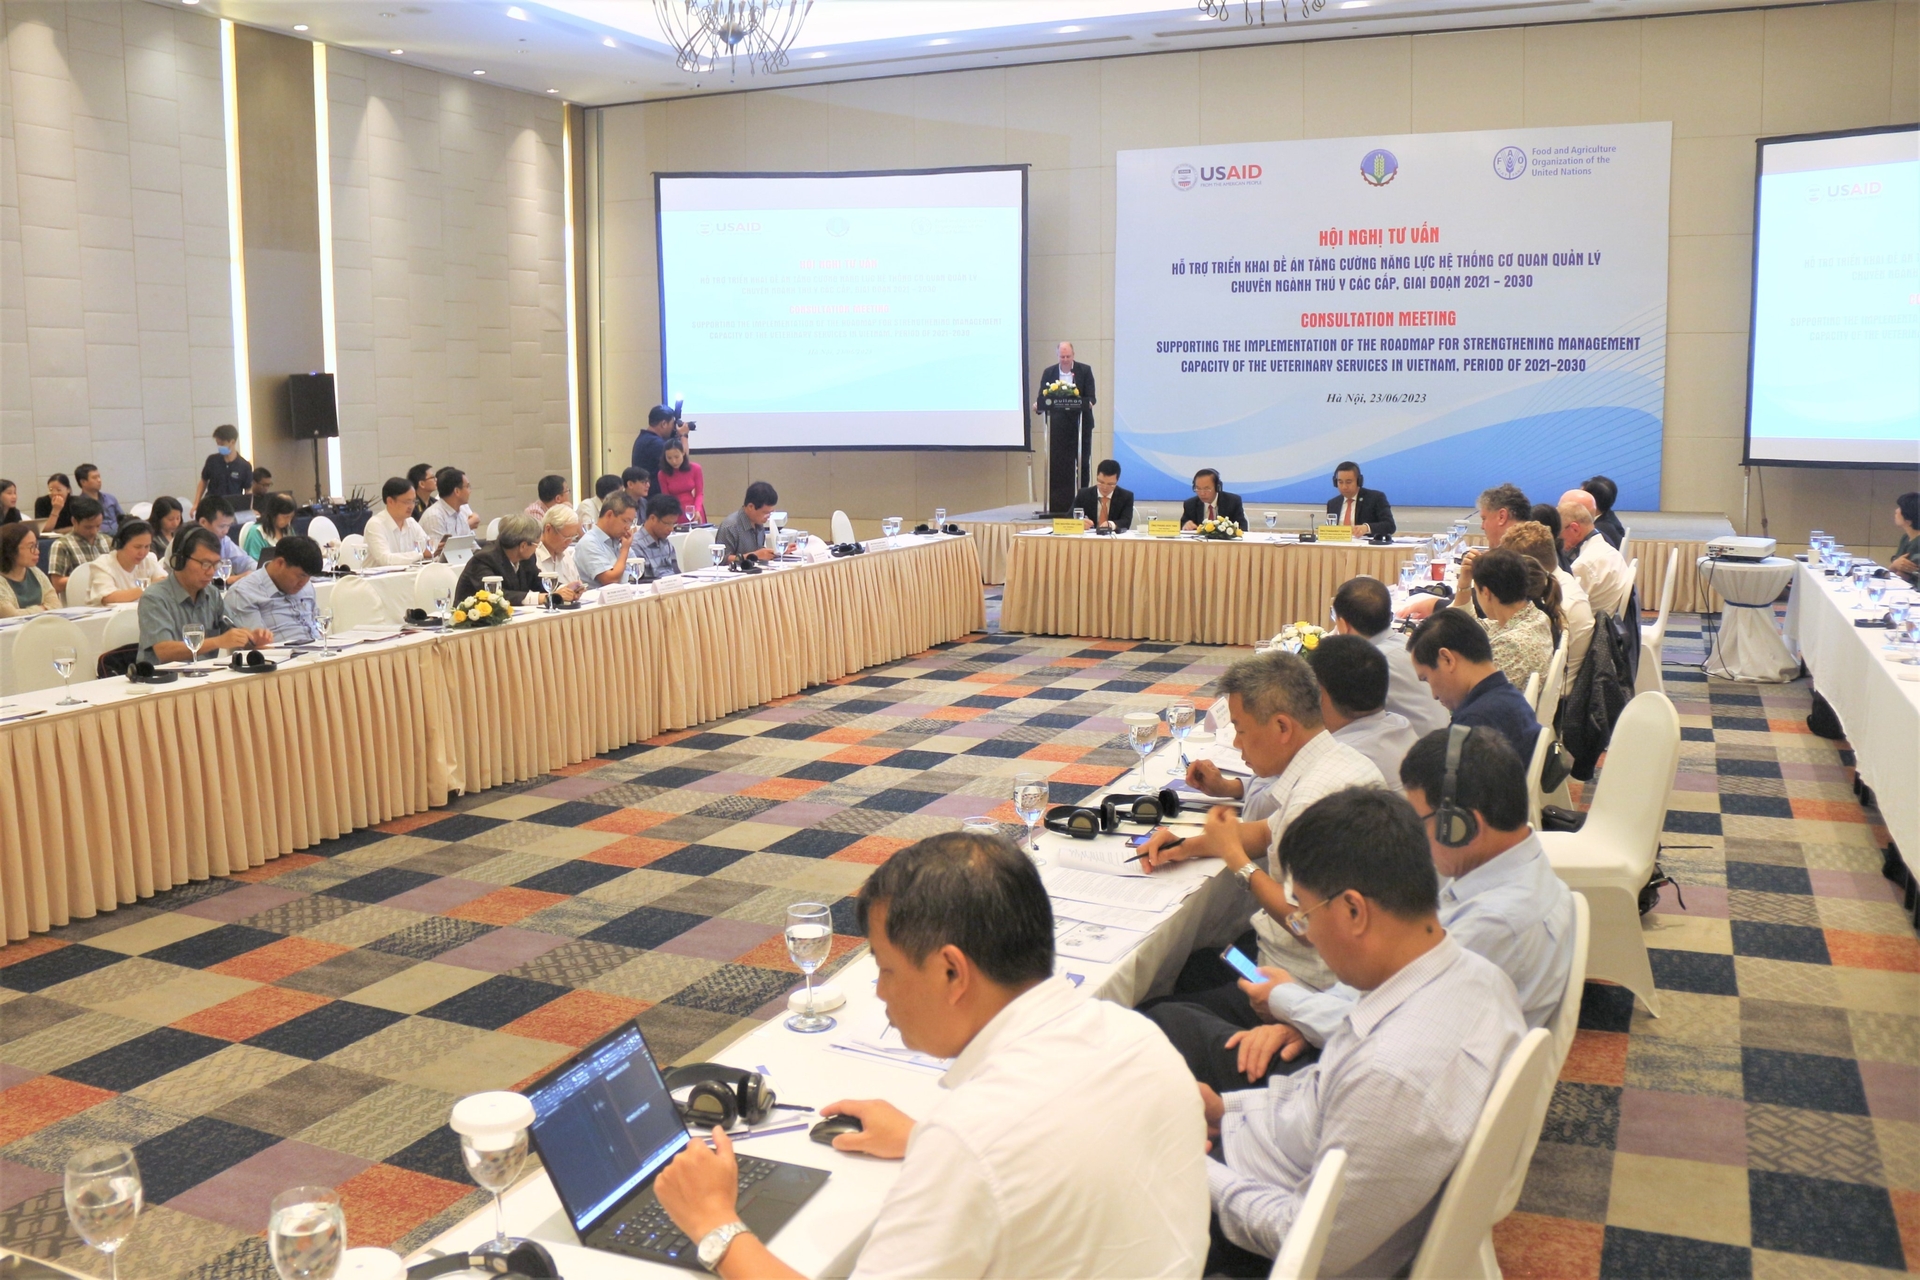 The 'Consultation meeting to support the implementation of the roadmap for strengthening the management capacity of Vietnam's services in Vietnam, 2021-2030' is held on June 23.